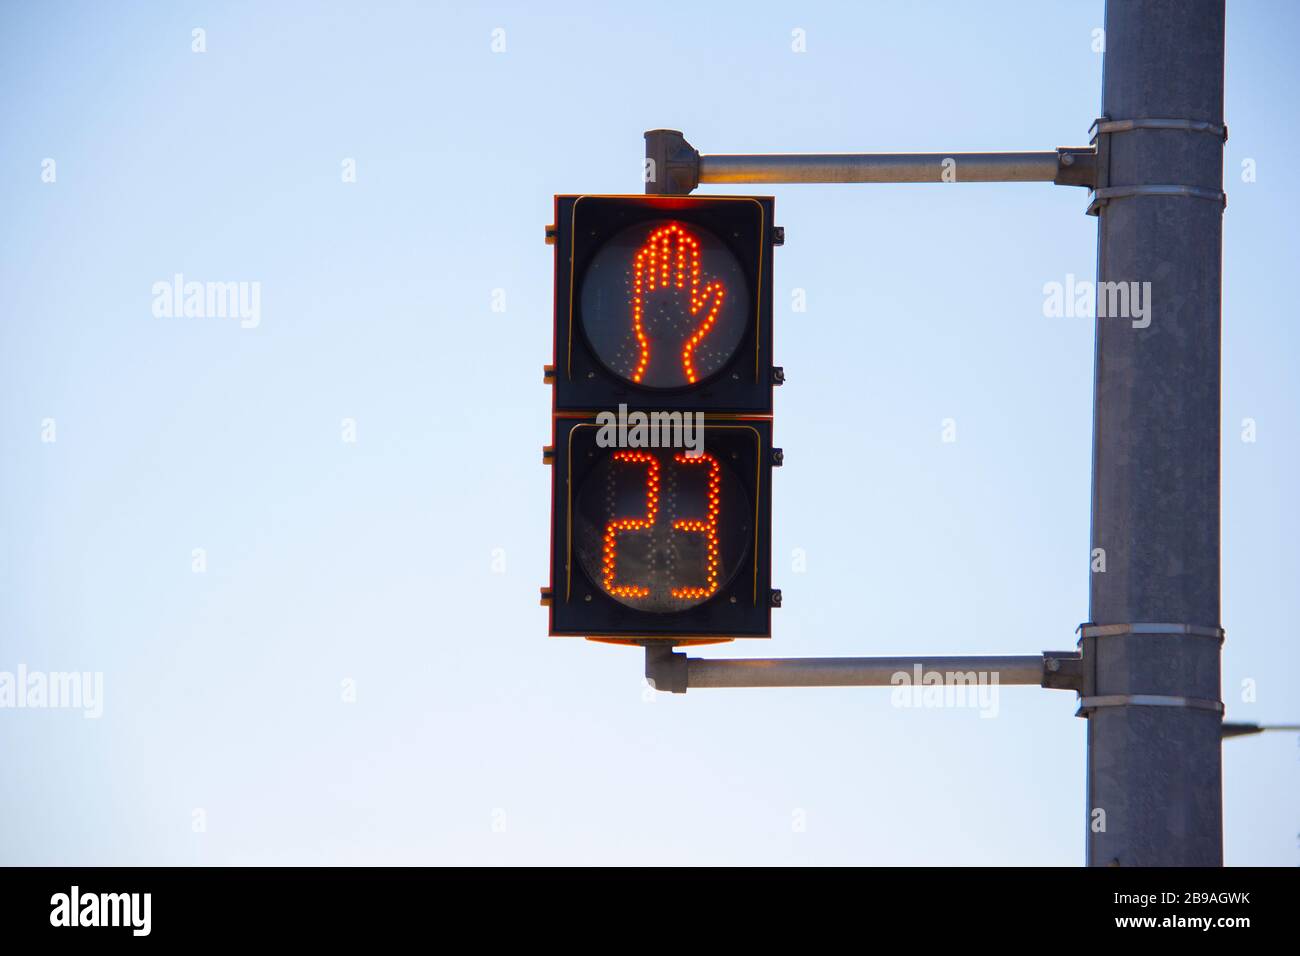 Pedestrian crossing light at 23 seconds Stock Photo